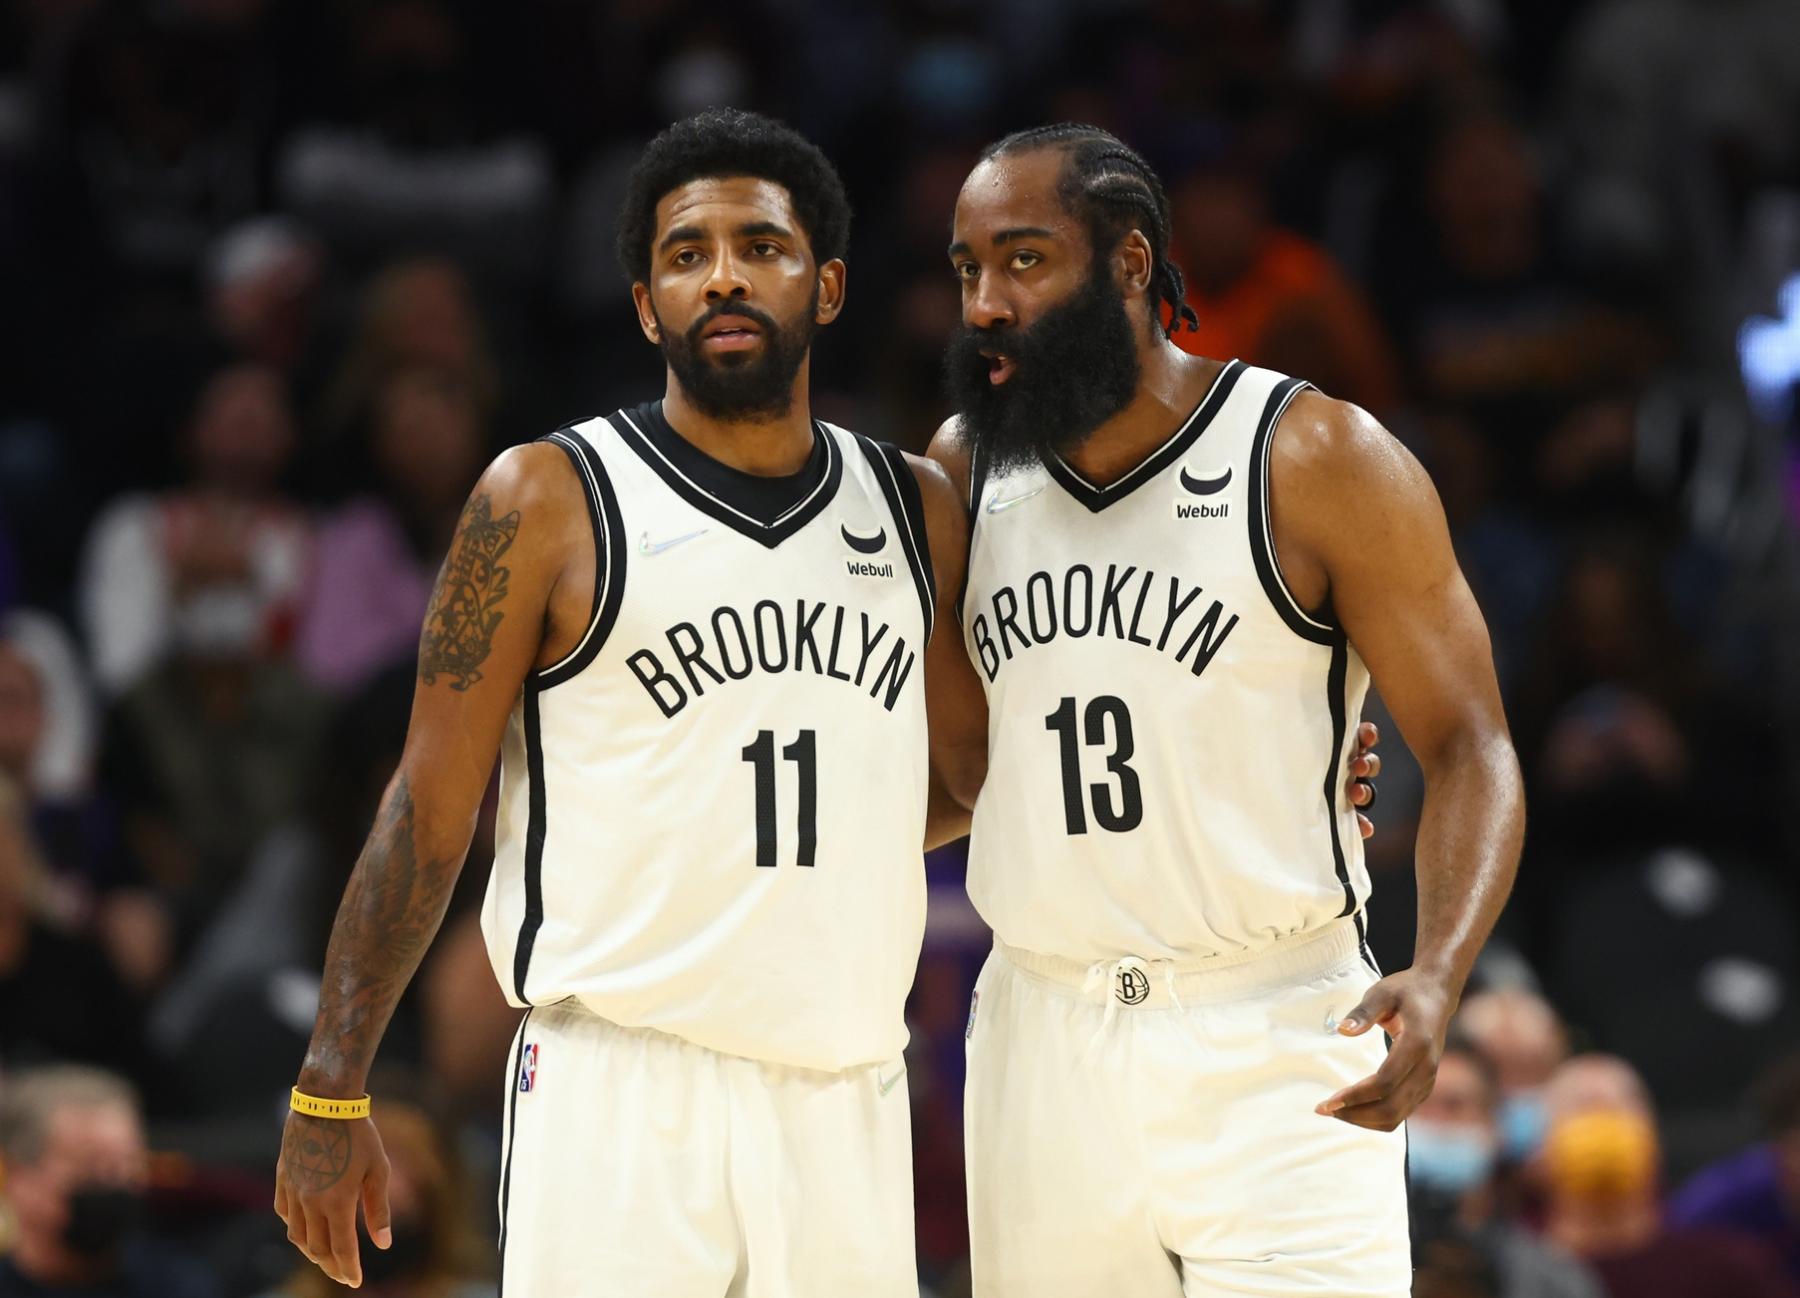 Brooklyn Nets guard Kyrie Irving (11) and guard James Harden (13) against the Phoenix Suns at Footprint Center. Mandatory Credit: Mark J. Rebilas-USA TODAY Sports